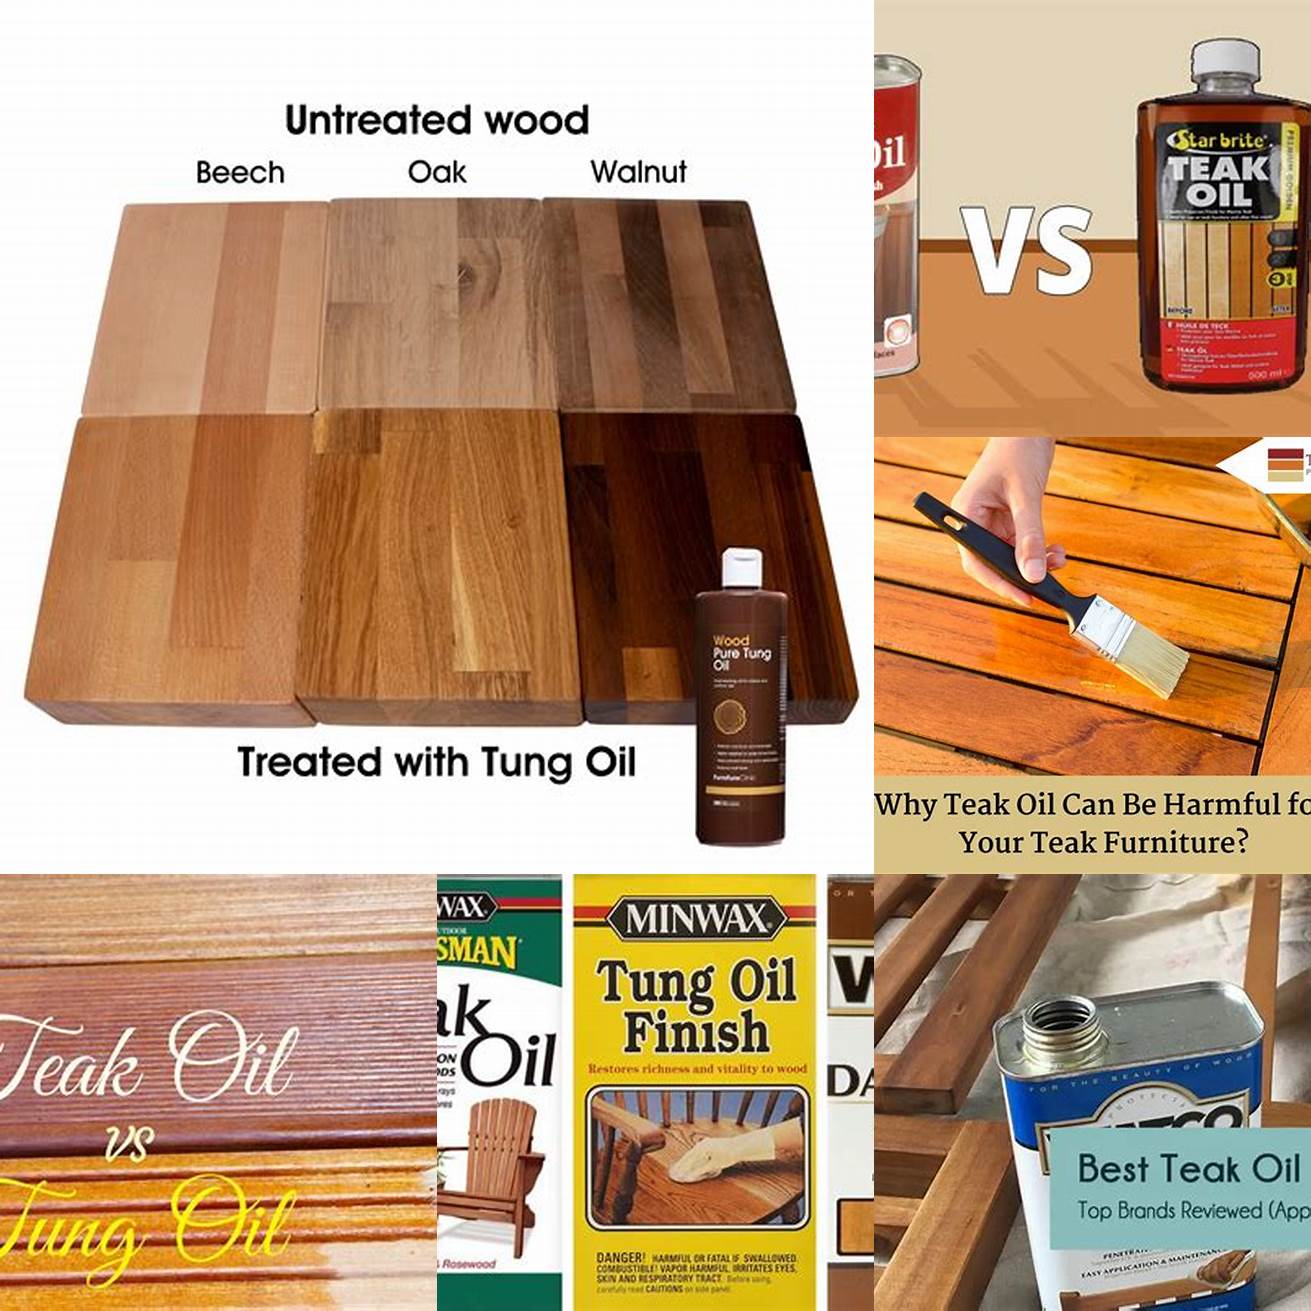 A comparison between teak oil and finishing oil